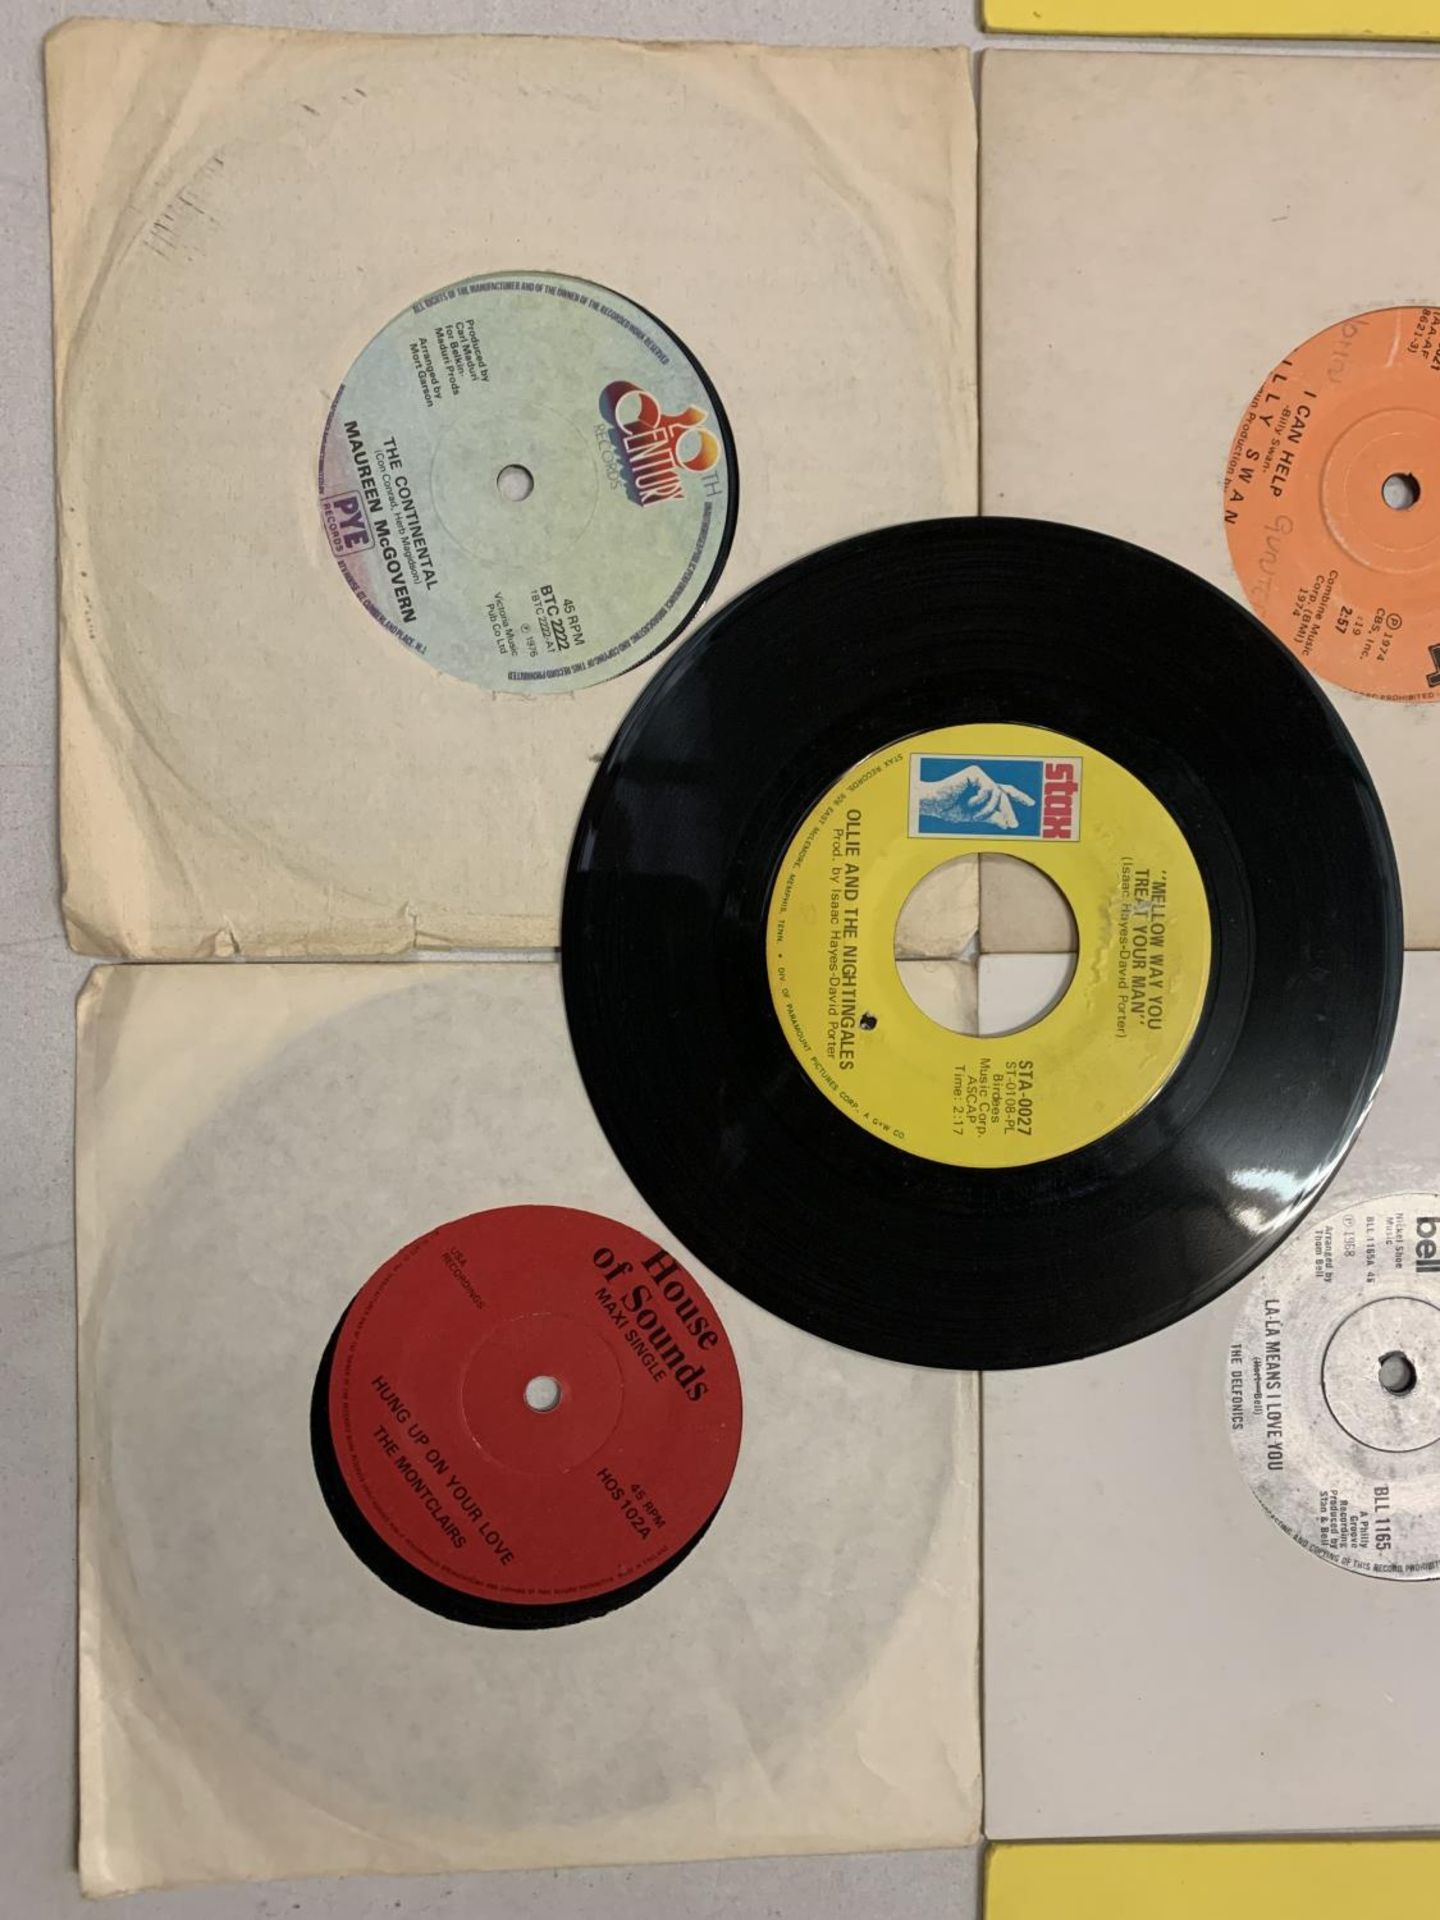 A COLLECTION OF 7 INCH MOSTLY FUNK / SOUL VINYL RECORDS TO INCLUDE: BILLY SWAN, NANCY SINATRA, - Image 6 of 6